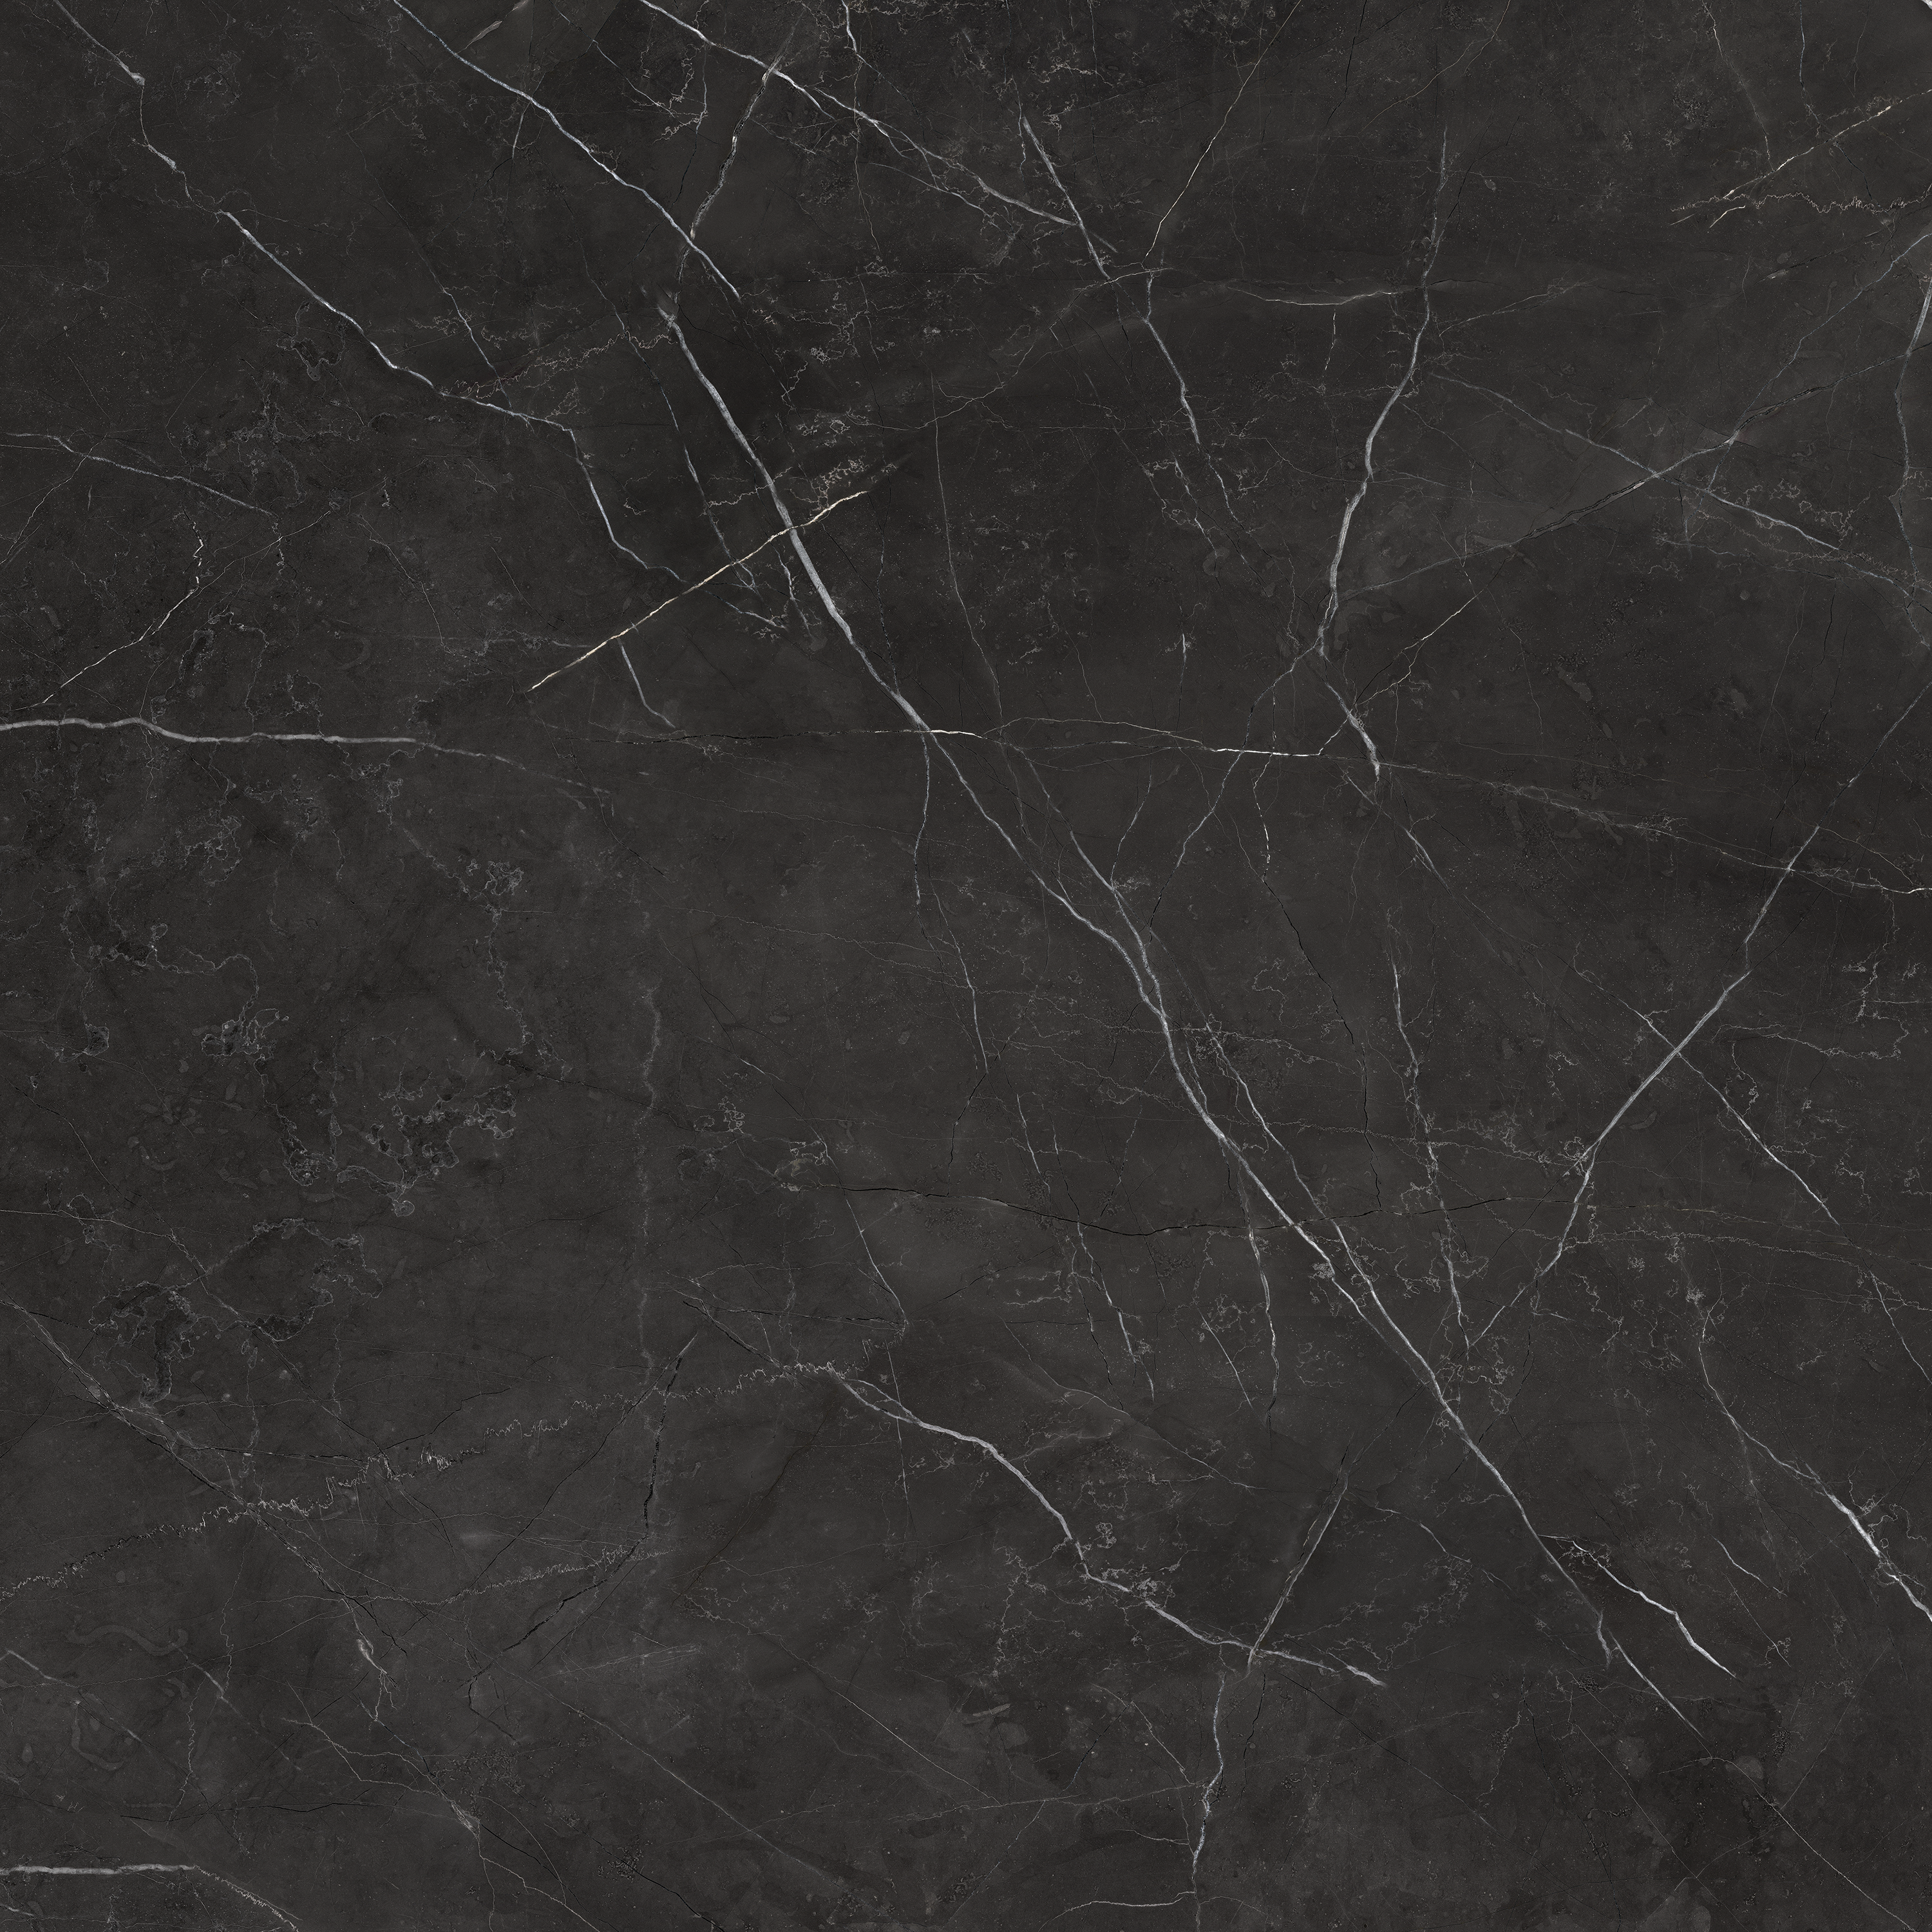 nero venato pattern glazed porcelain field tile from la marca anatolia collection distributed by surface group international polished finish rectified edge 32x32 square shape